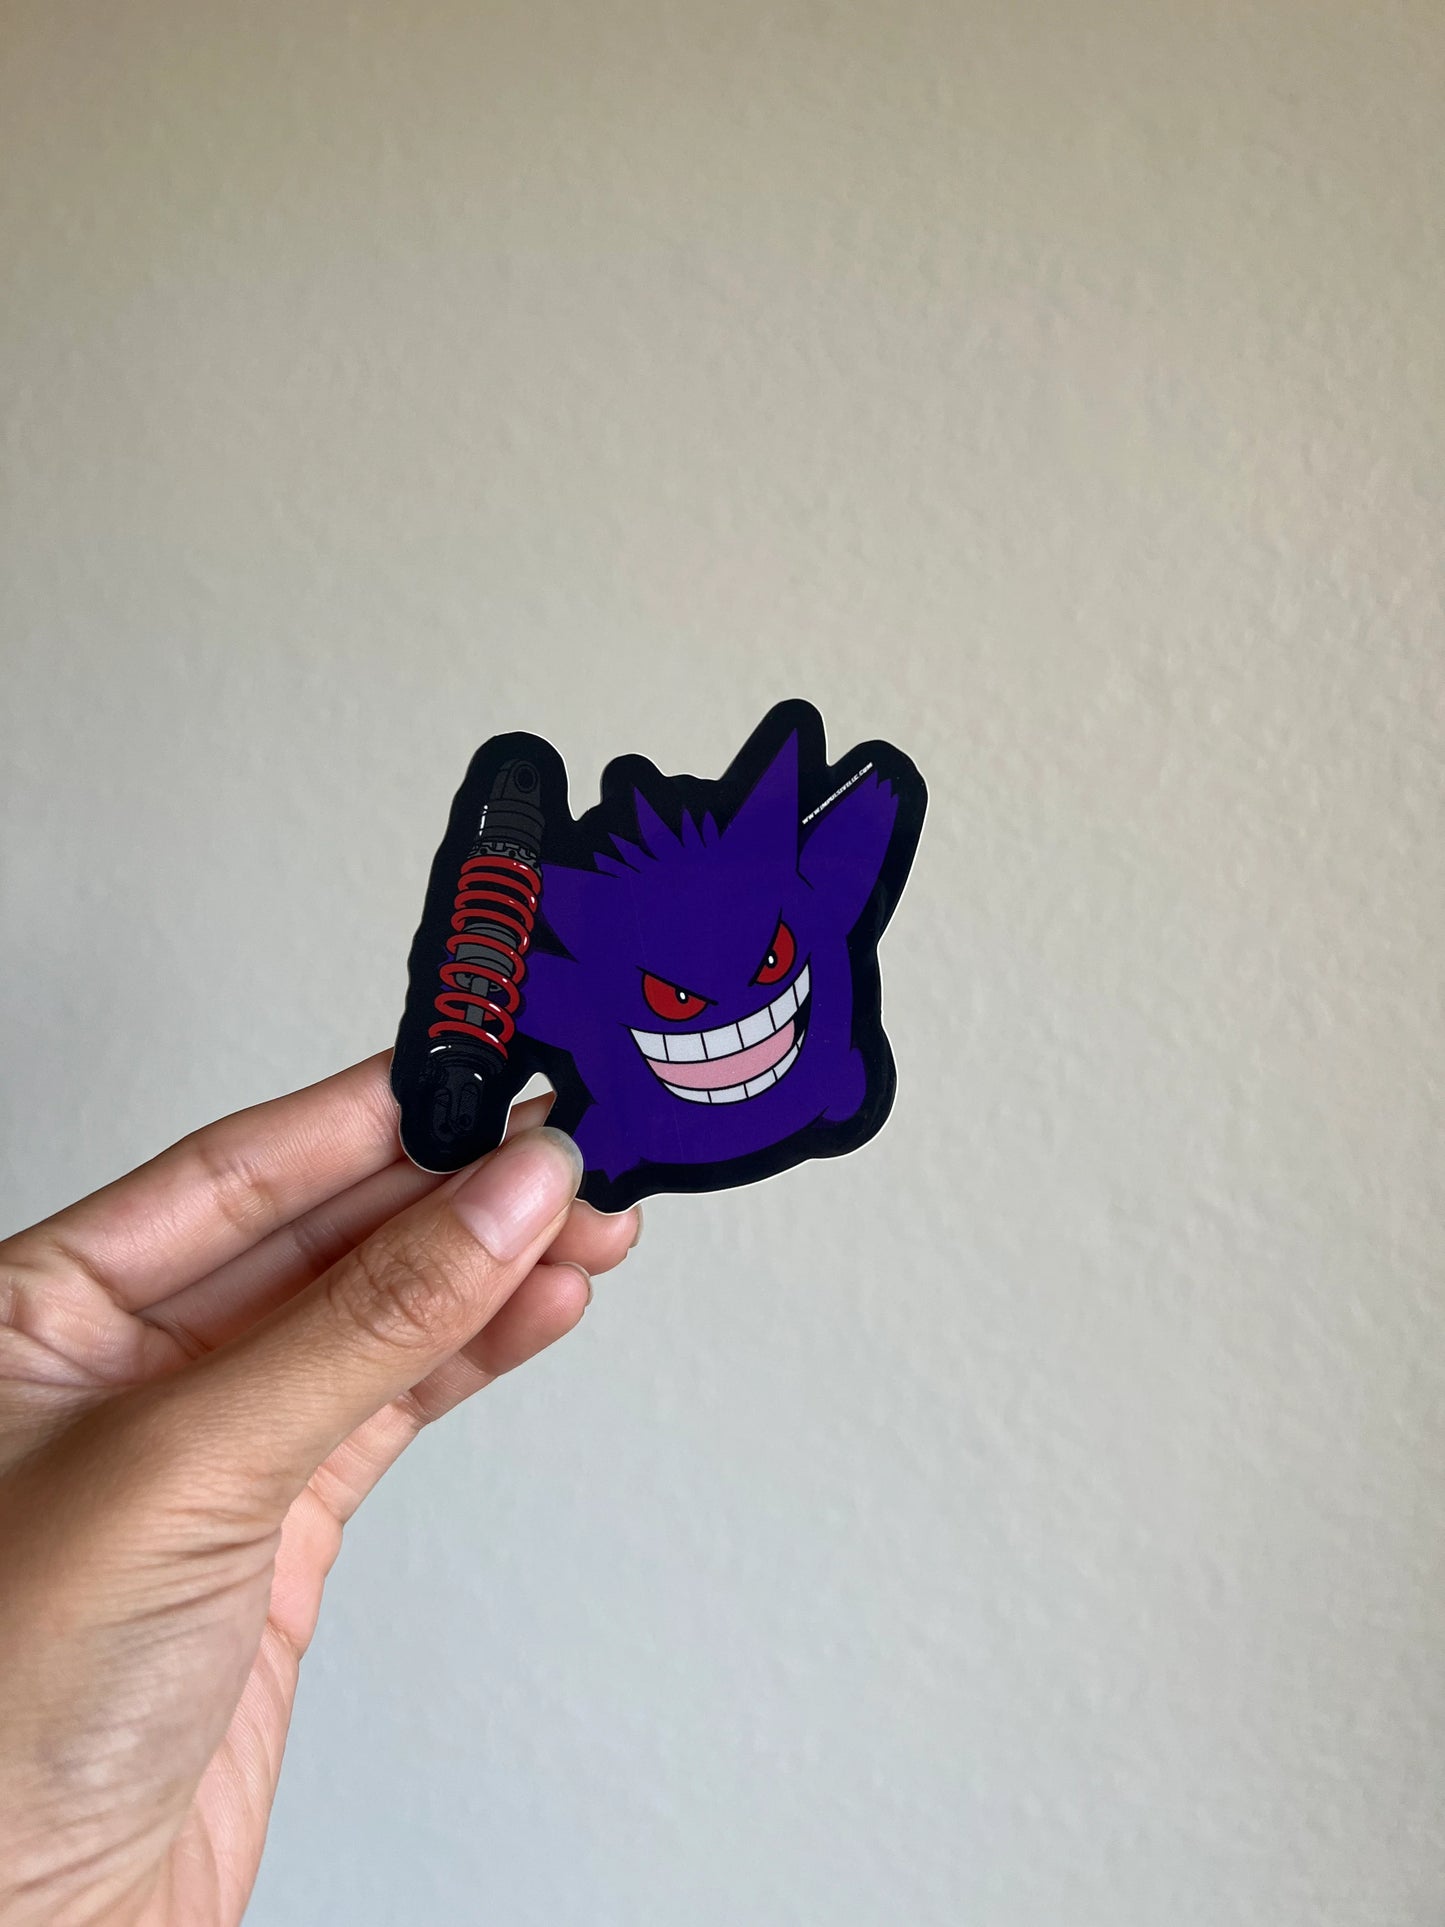 Monsters Sticker Pack (6)